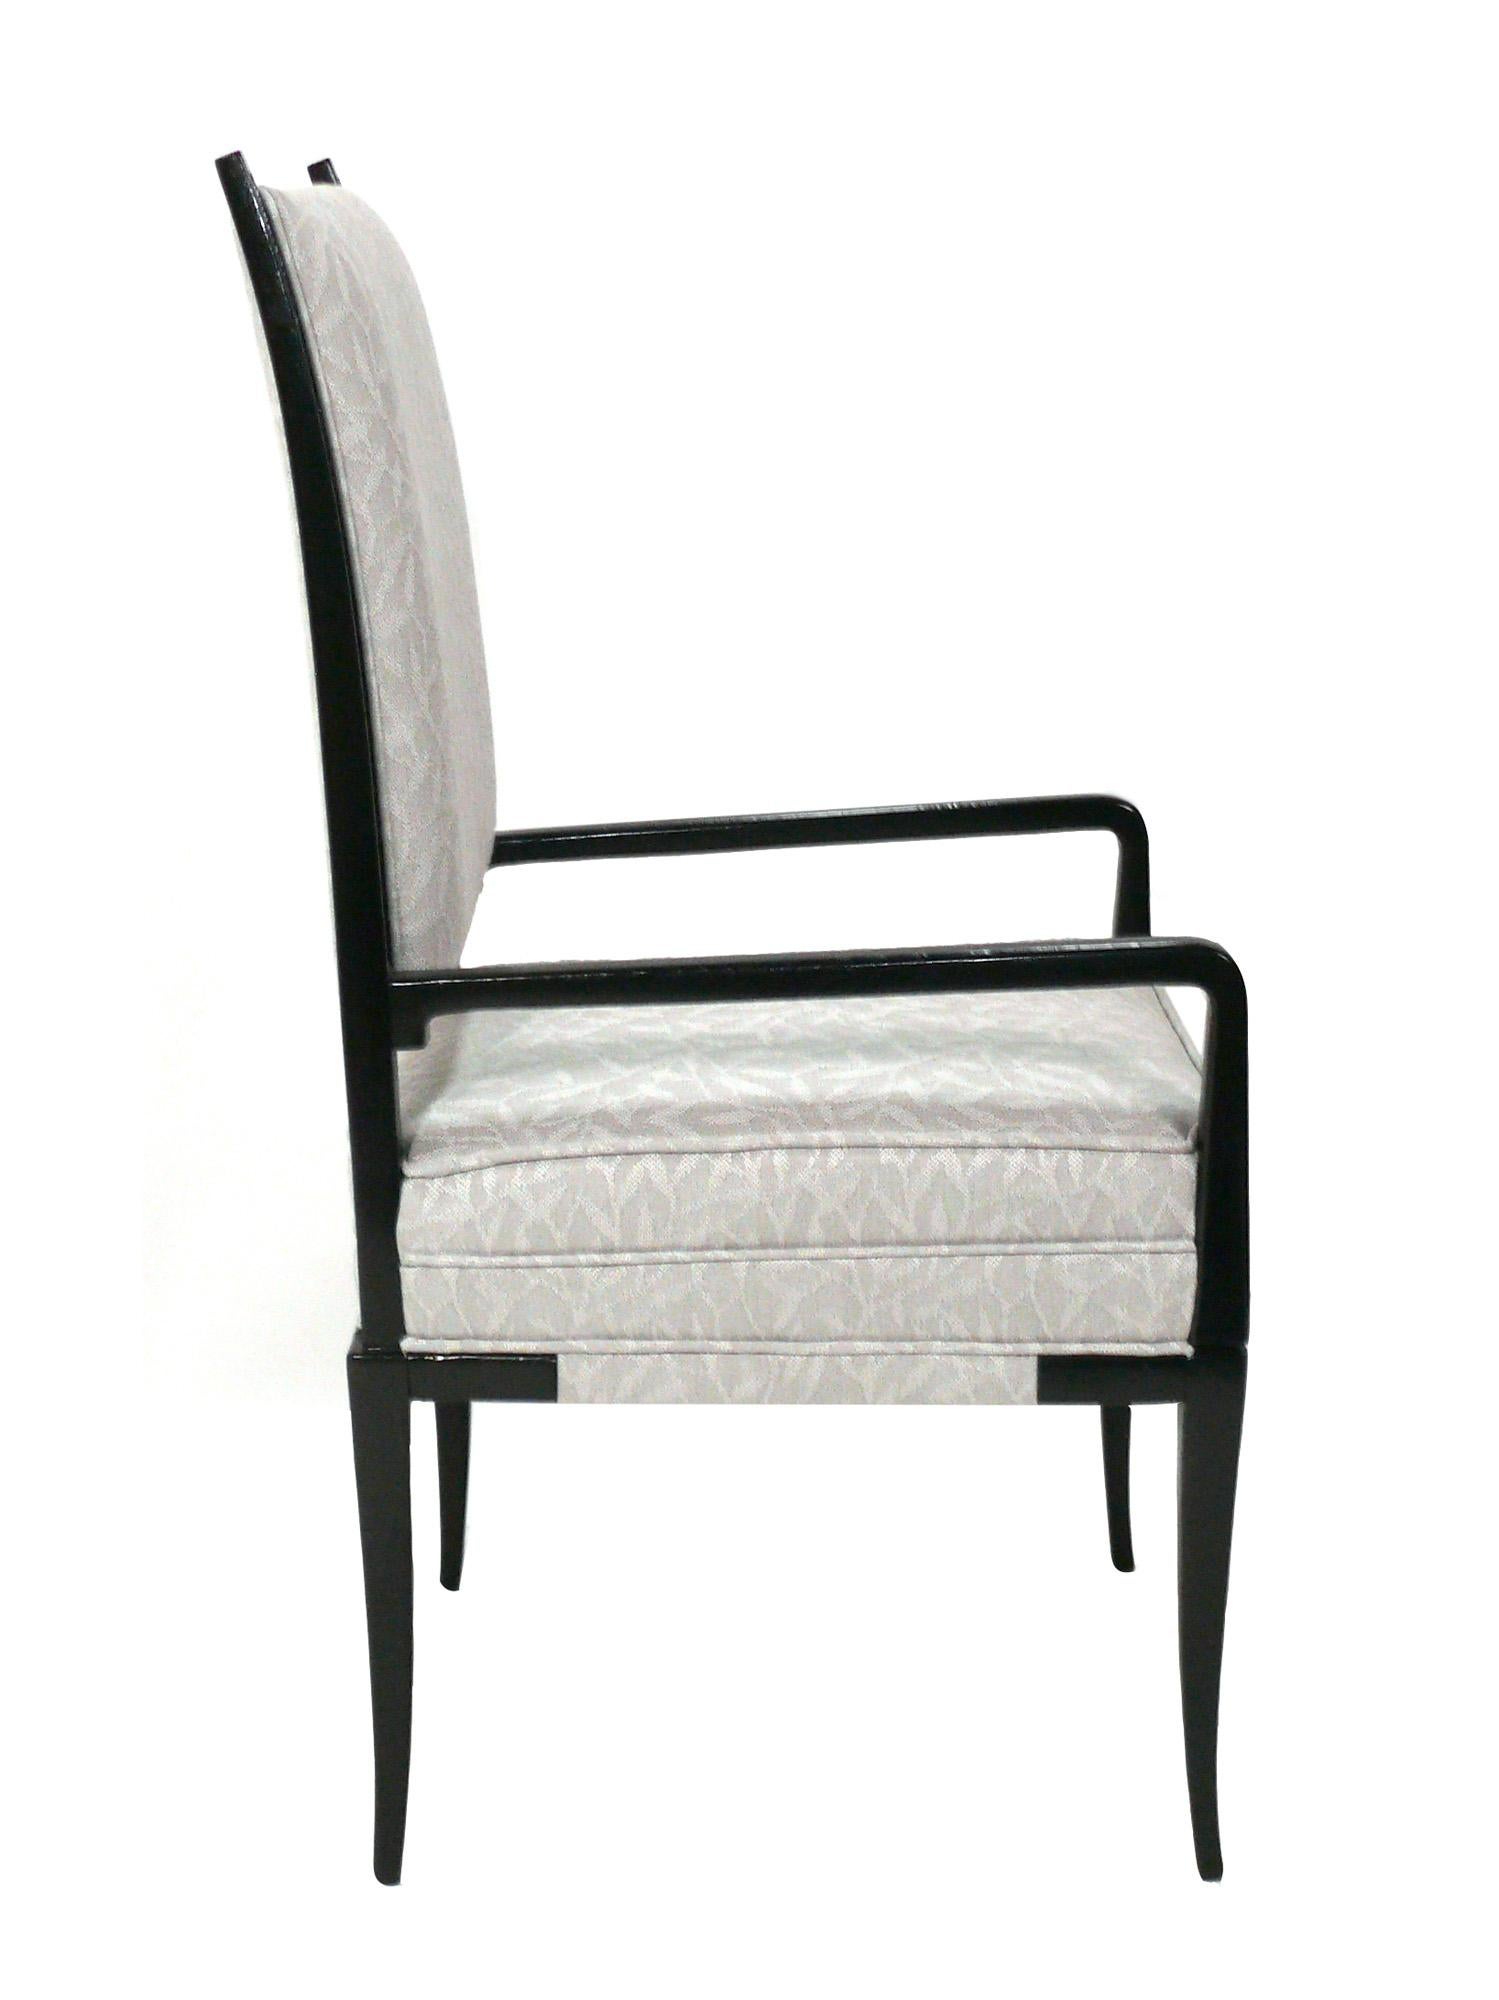 Lacquered Tommi Parzinger Dining Chairs 2 Arm Chairs 6 Side Chairs For Sale